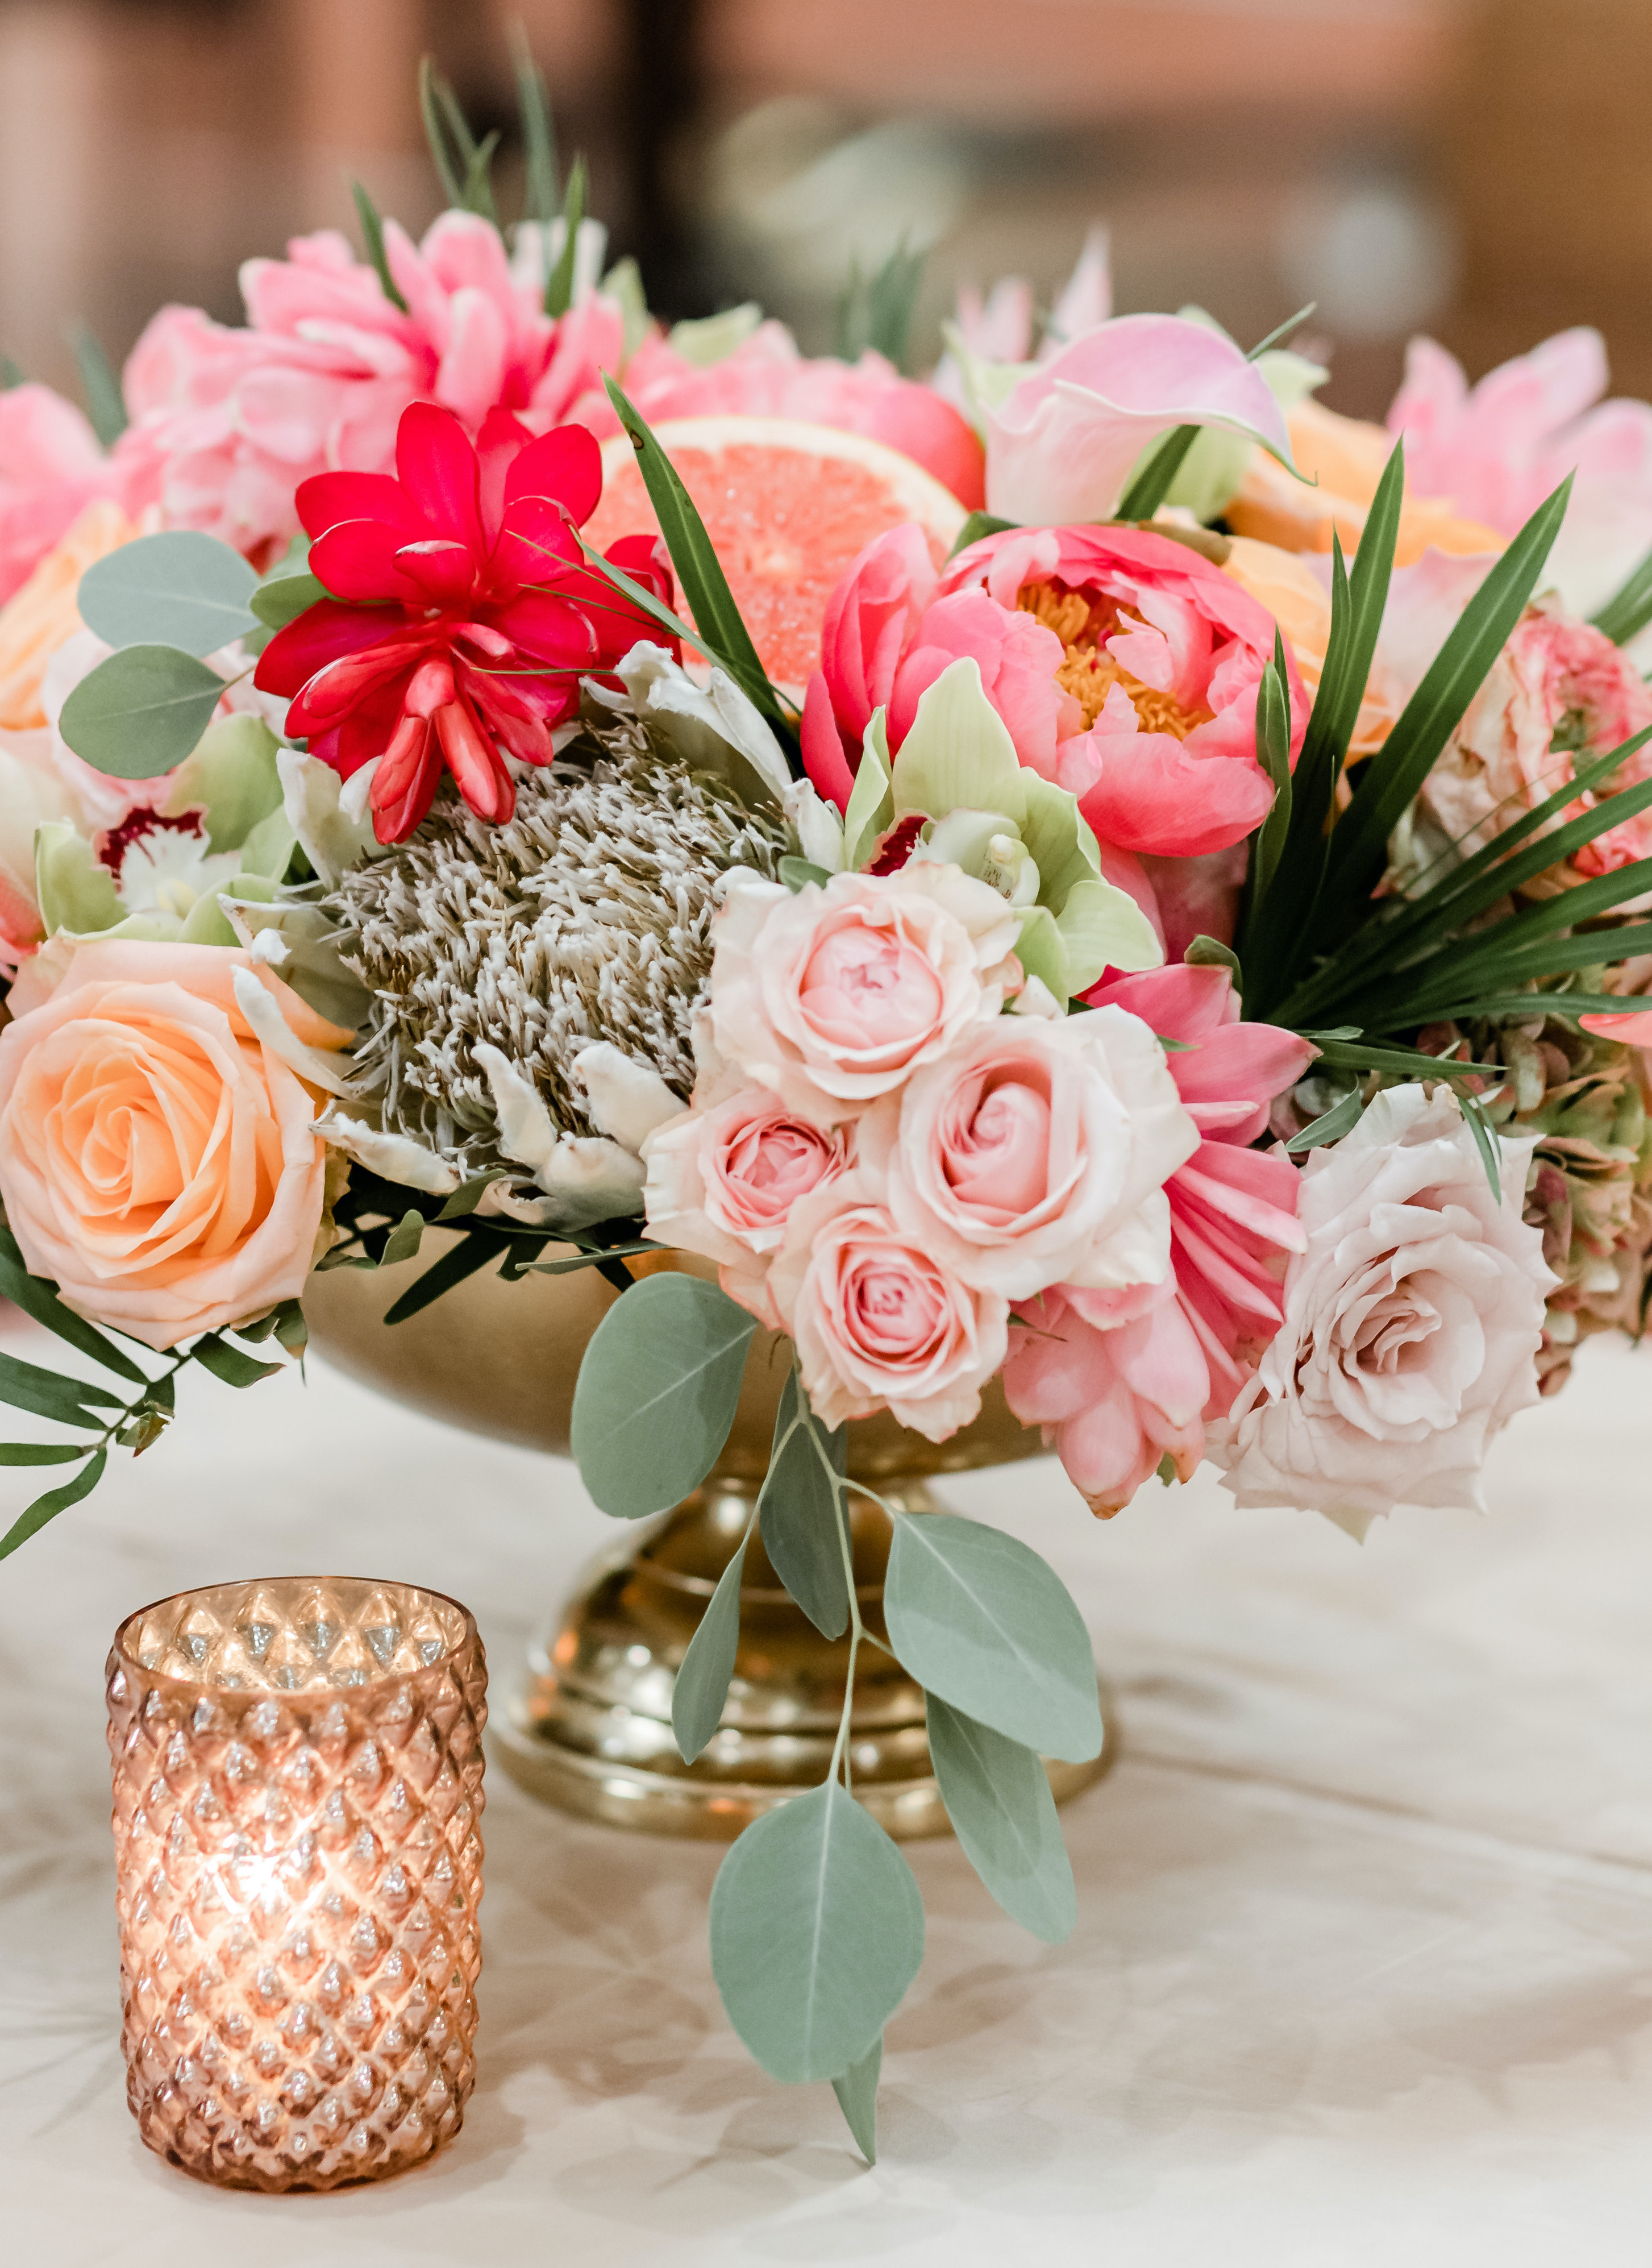 A tropical centerpiece full of bright pink, orange and red flowers sits on a table for a wedding reception.